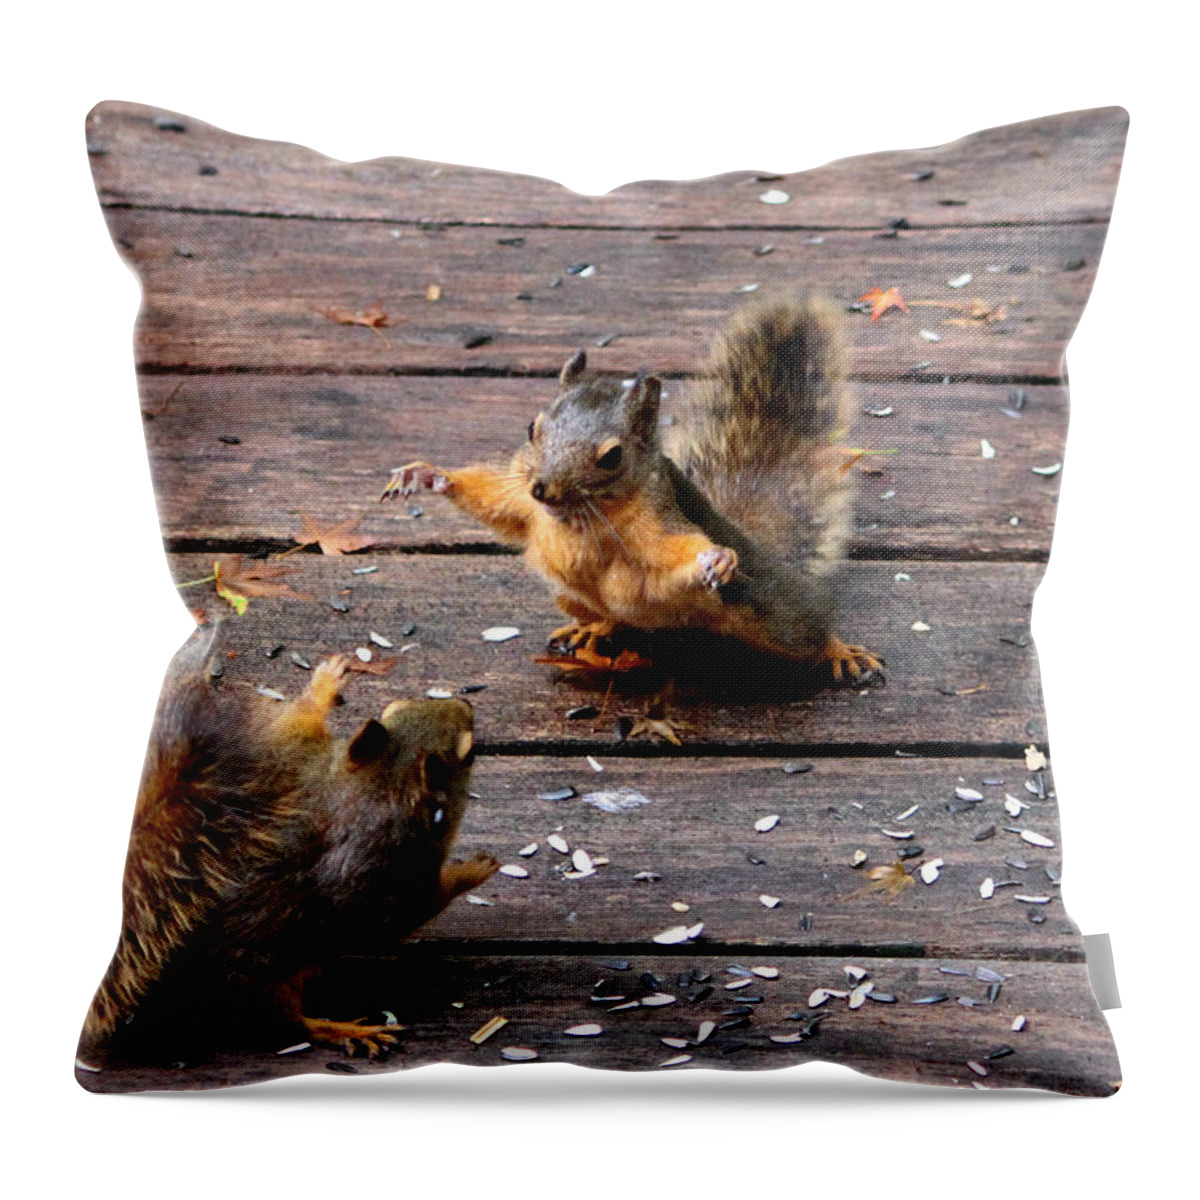 Mammals Throw Pillow featuring the photograph I'm going to box your ears by Kym Backland